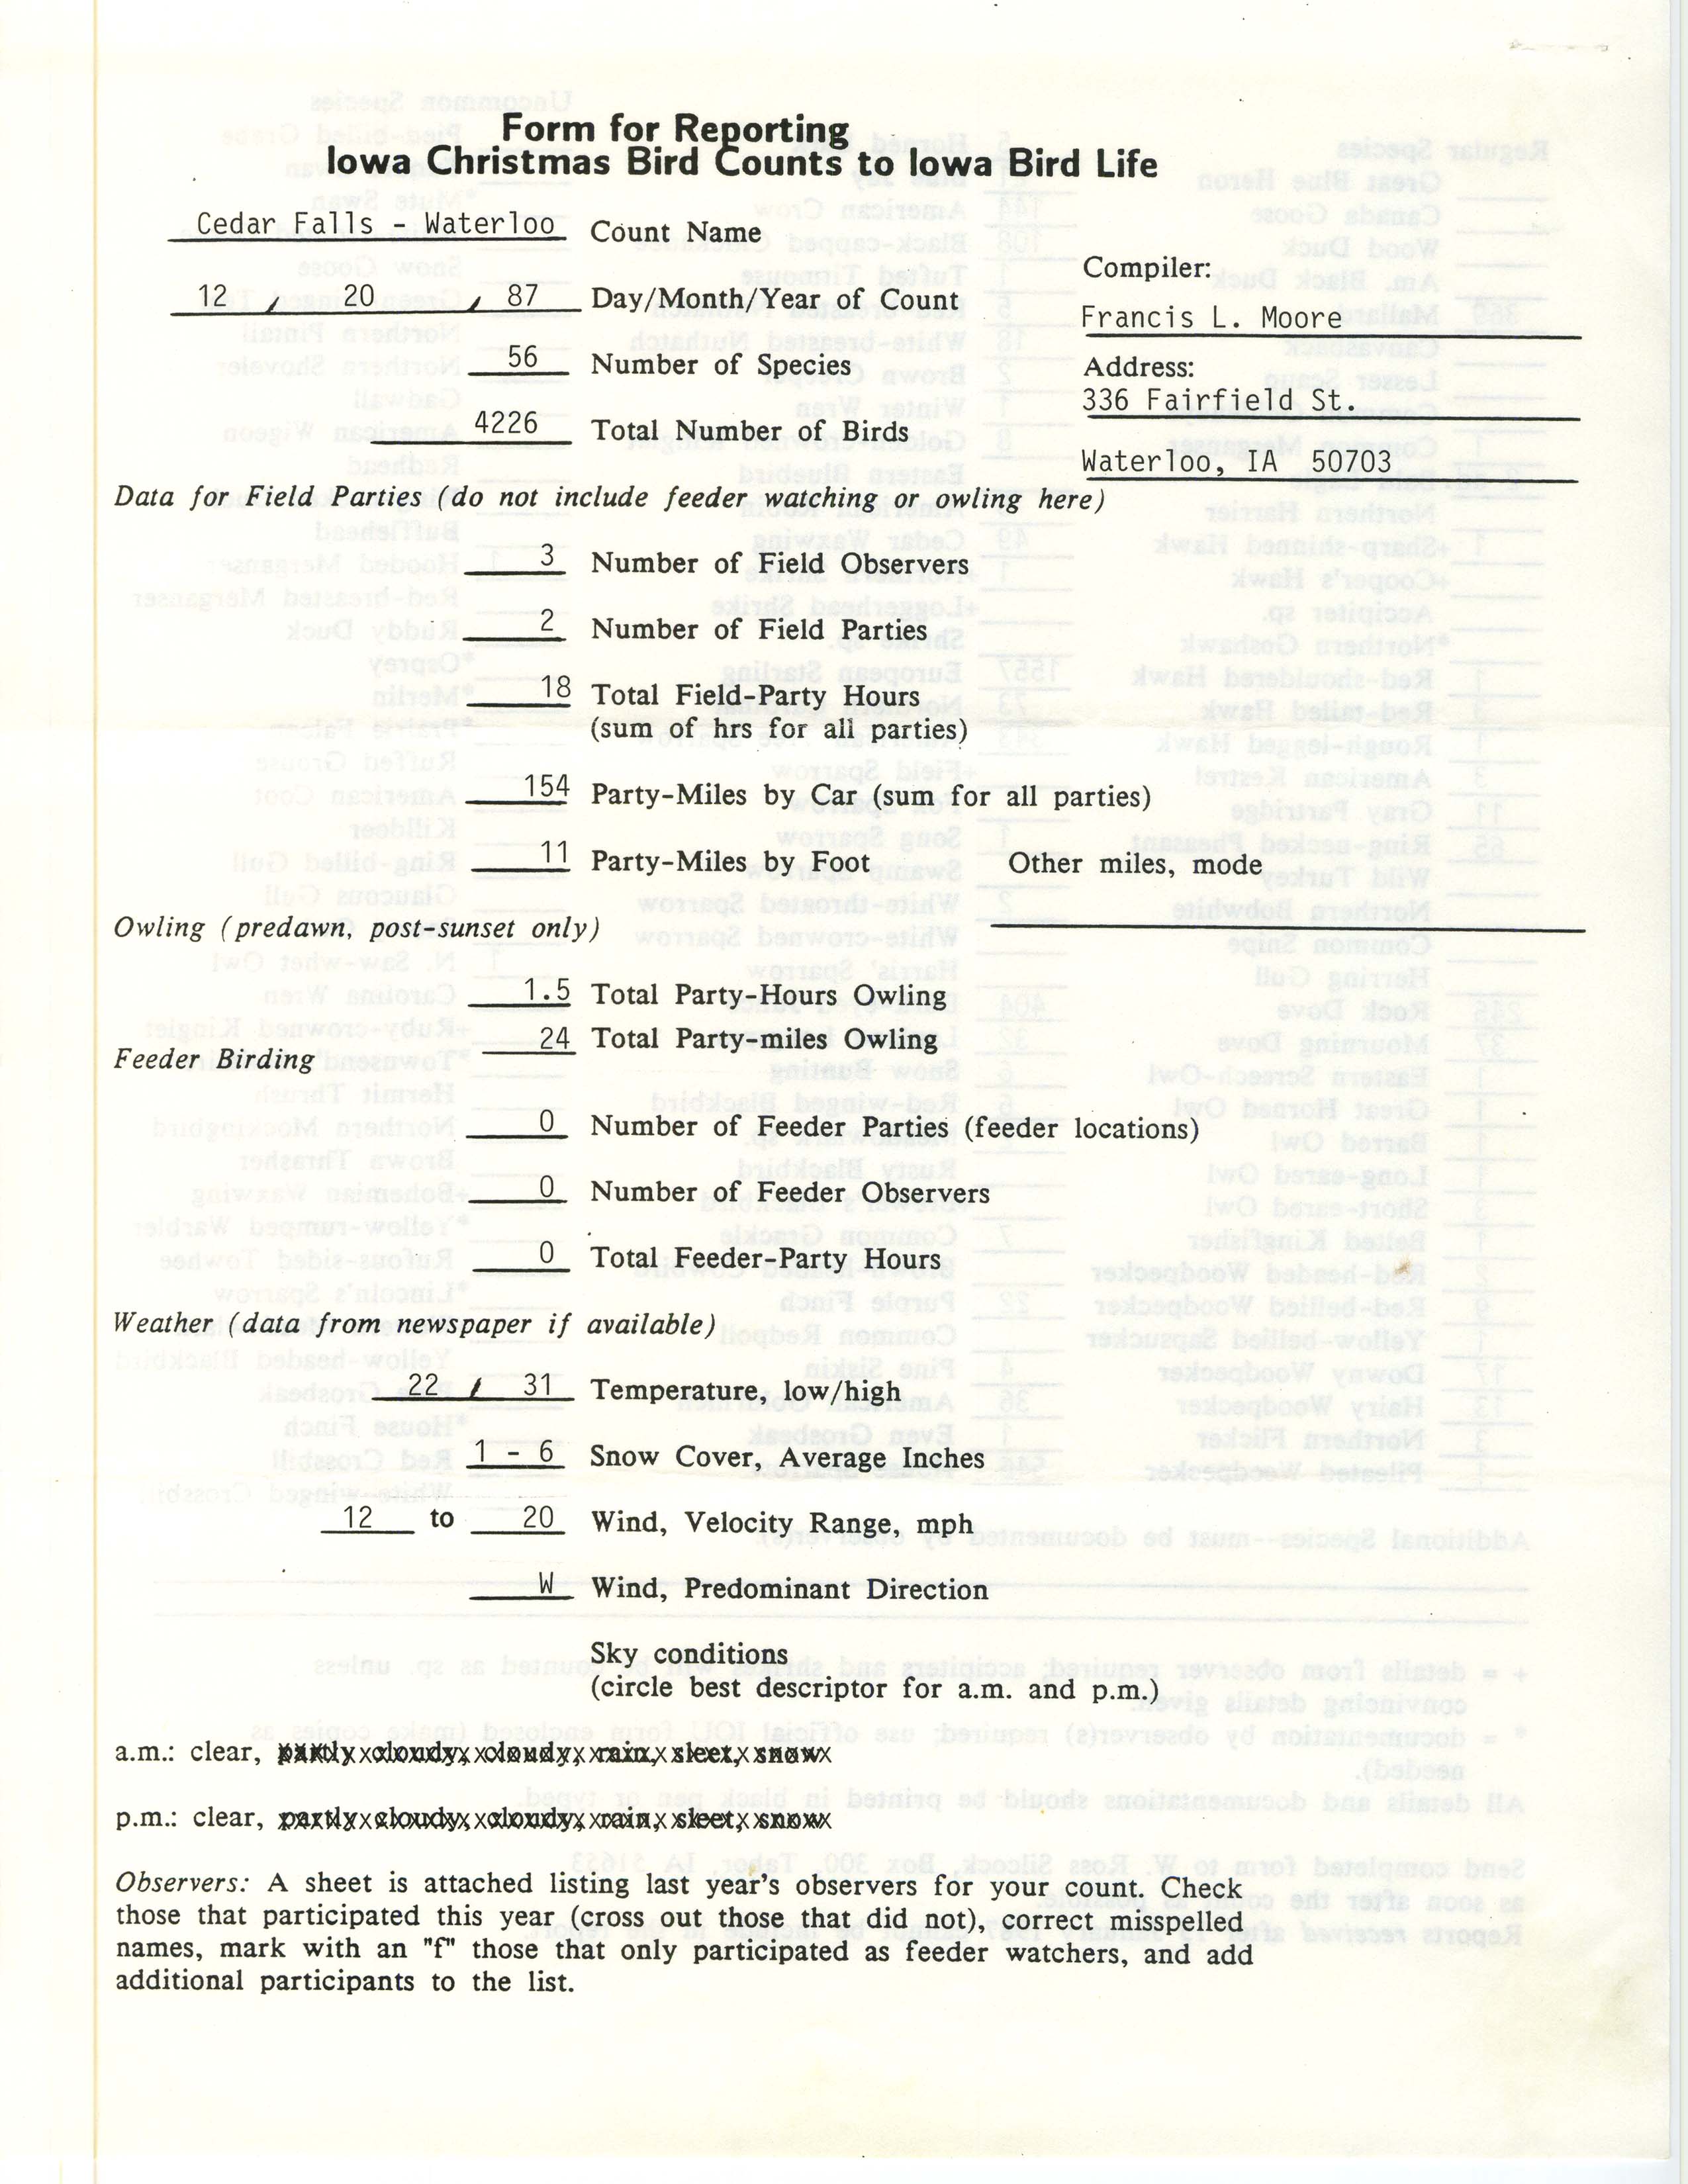 Form for reporting Iowa Christmas bird counts to Iowa Bird Life, Francis L. Moore, December 20, 1987